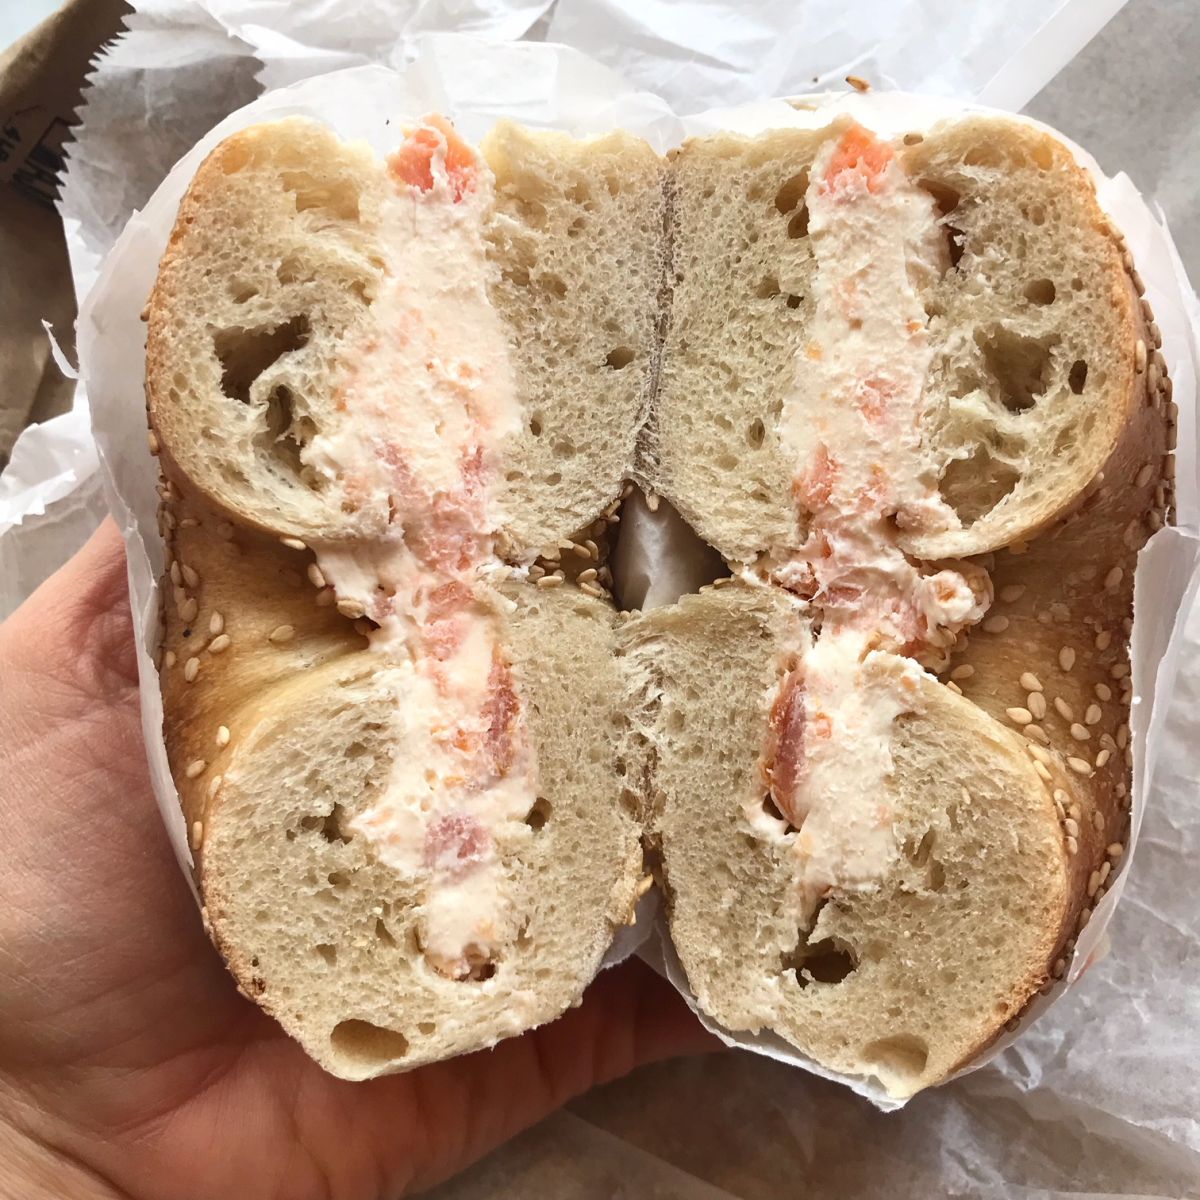 Bagel in NYC